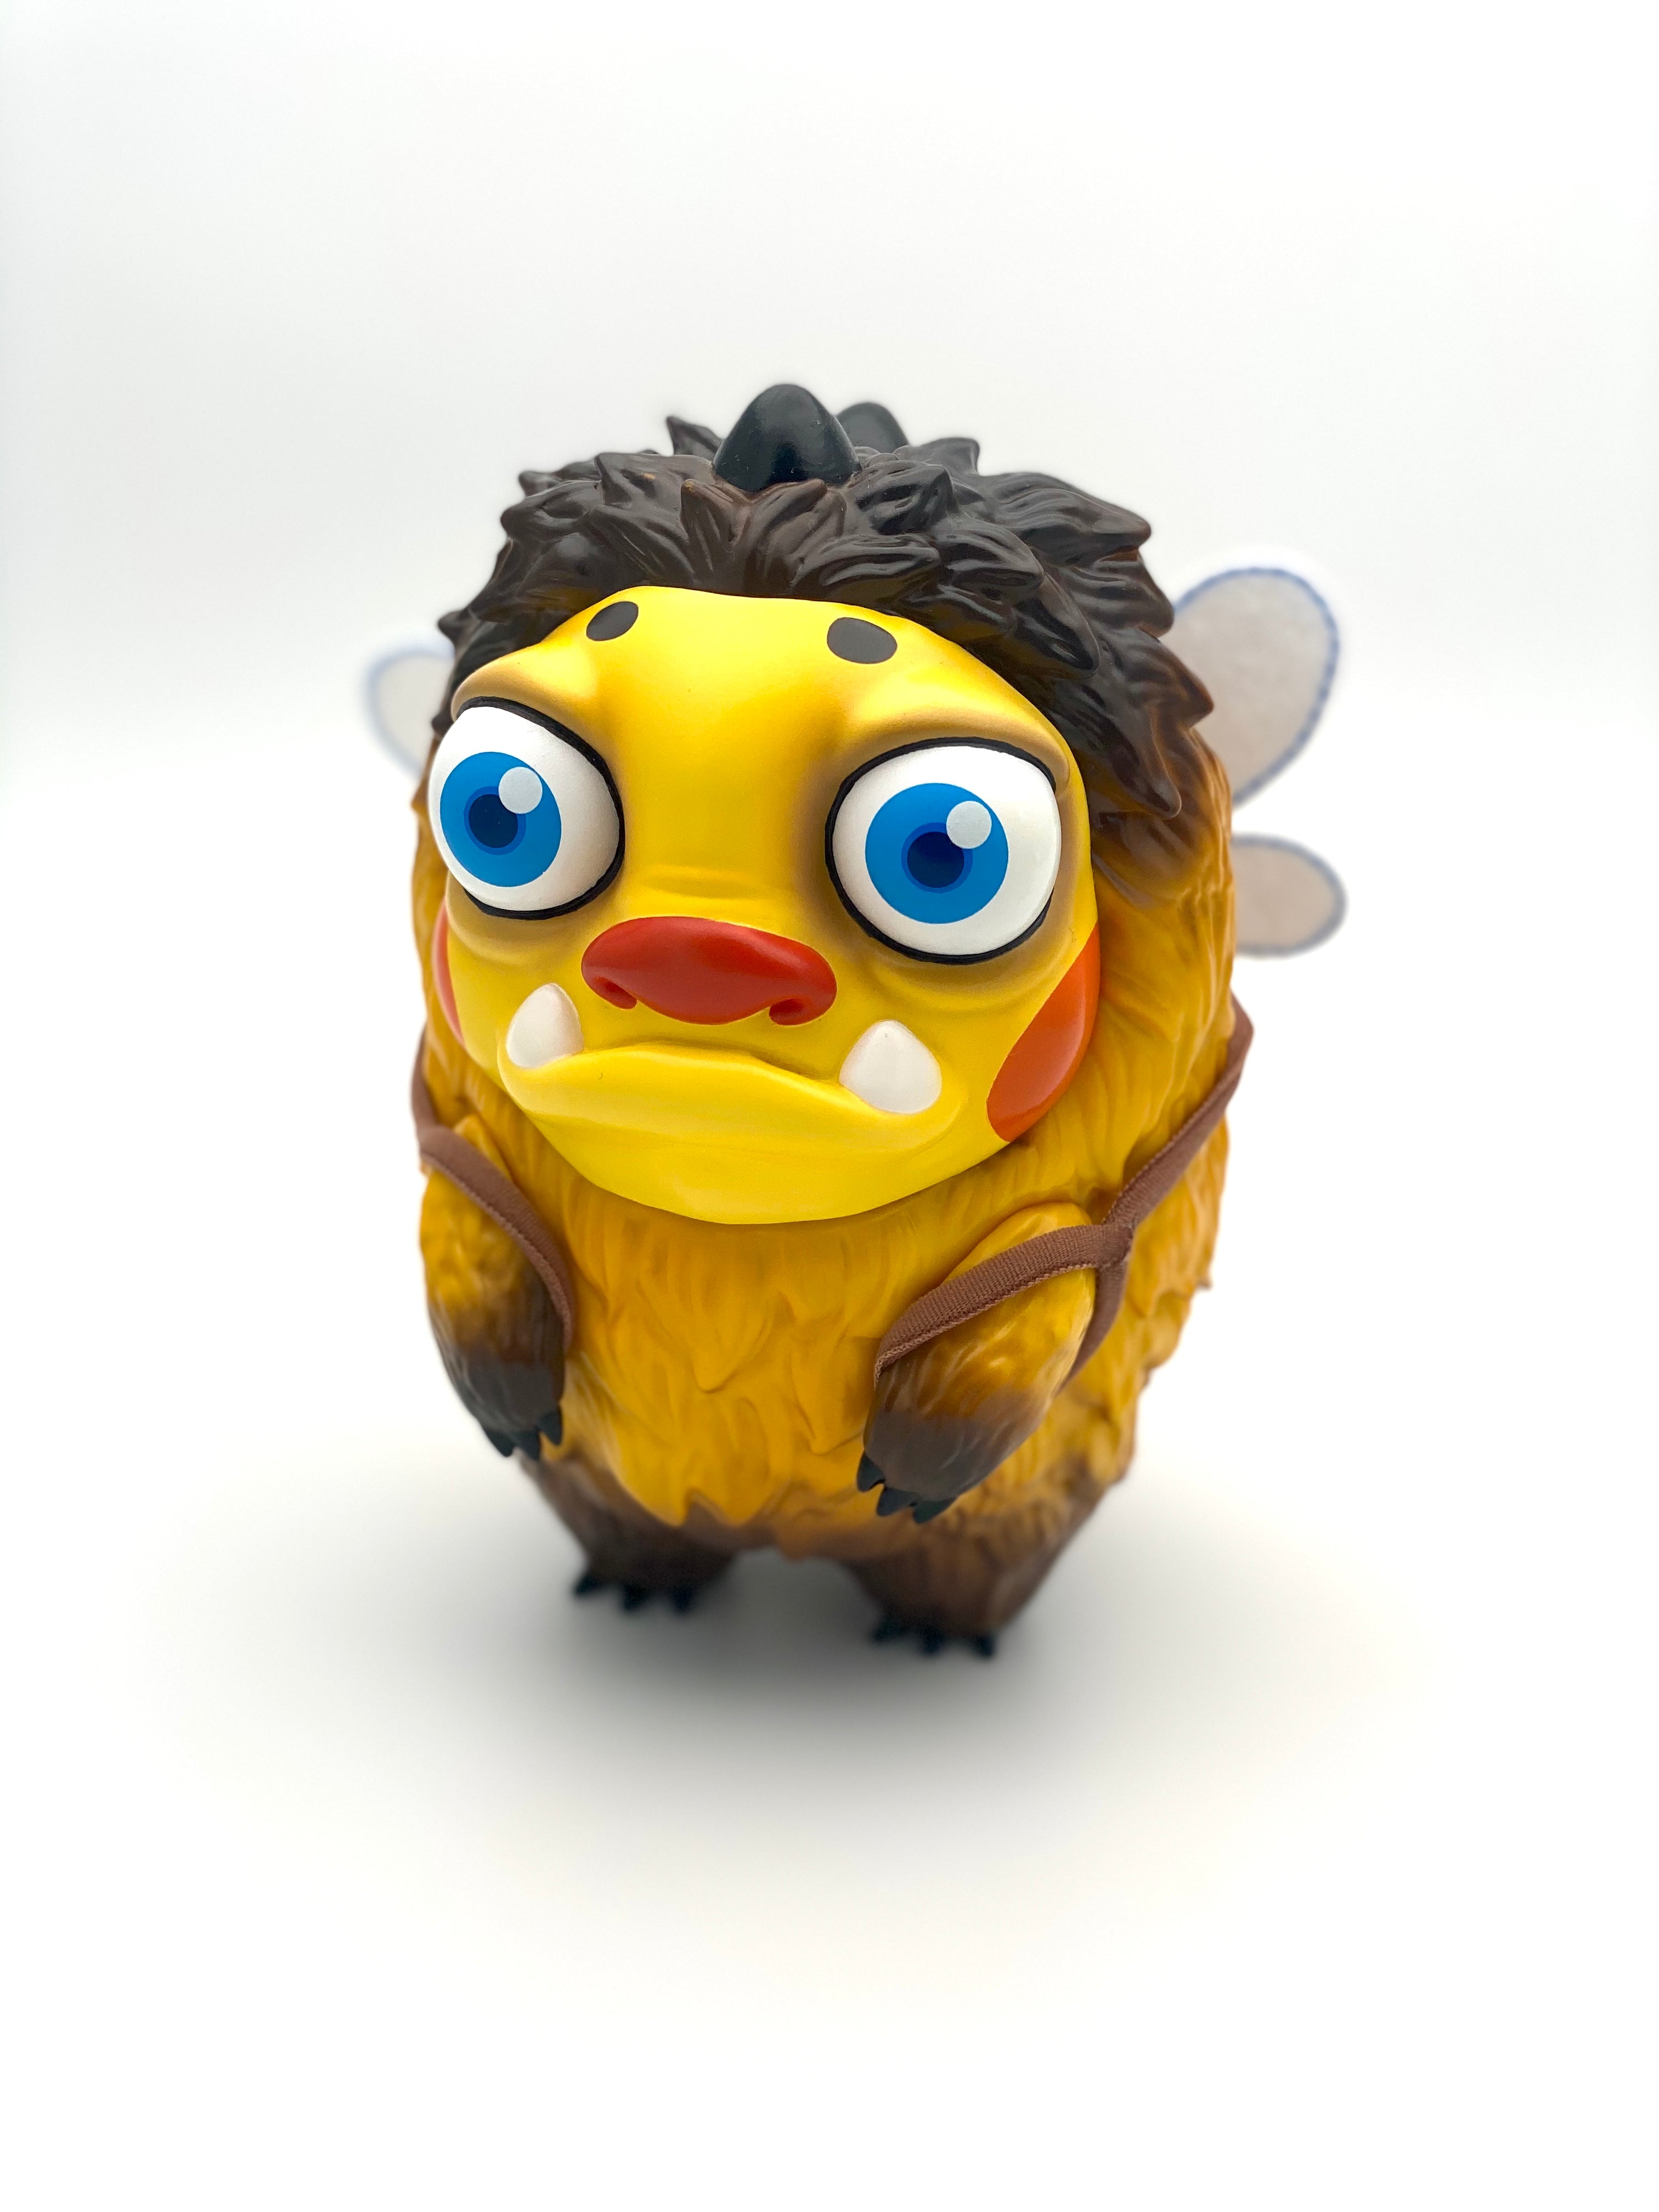 Cartoon toy with wings and oval object, close-up of eyes and white egg.